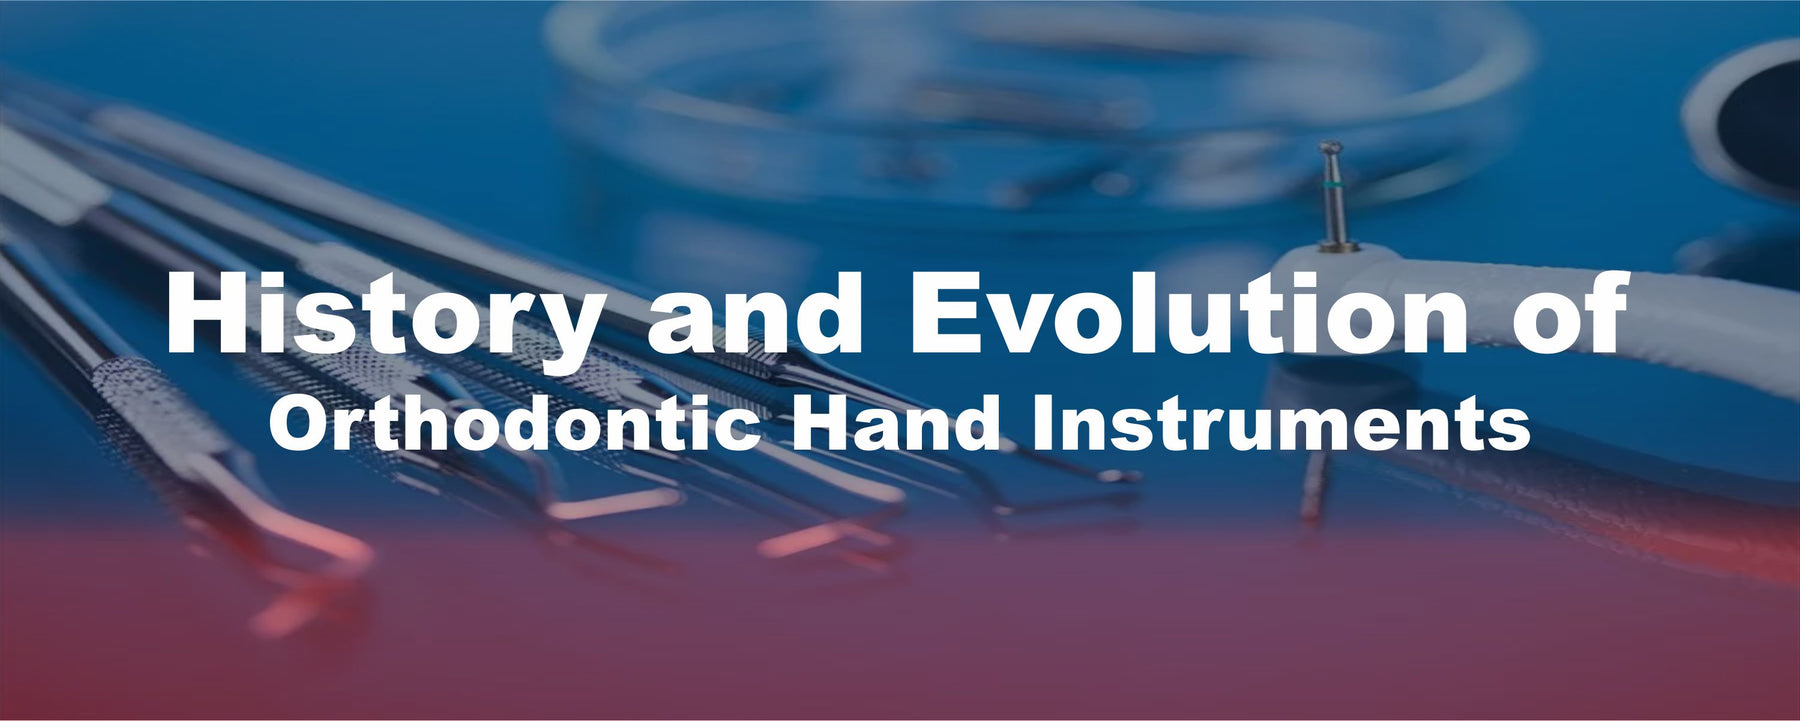 History and Evolution of Orthodontic Hand Instruments